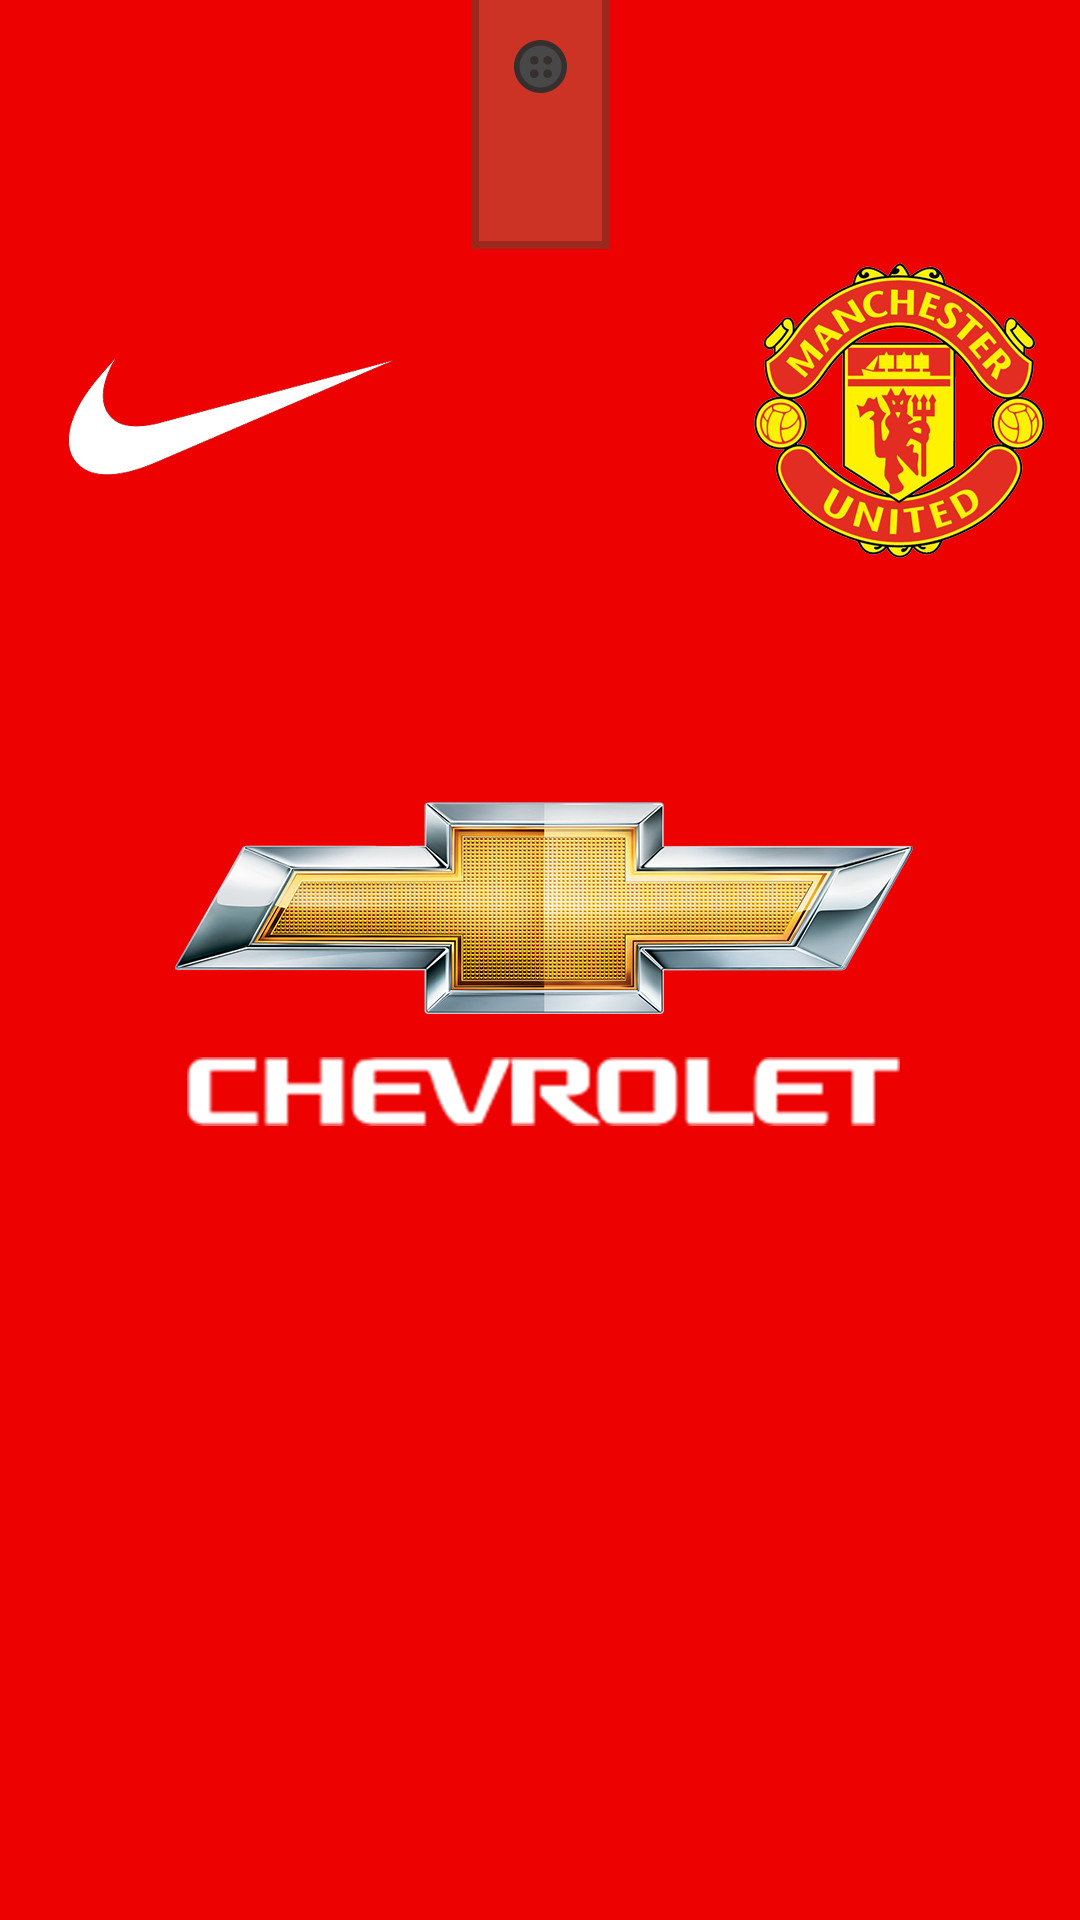 1080x1920 Nike Wallpaper, Football Icon, Football Stuff, Iphone Wallpapers, Soccer  Kits, Manchester United Football, Football Wallpaper, Gareth Bale, Man  United